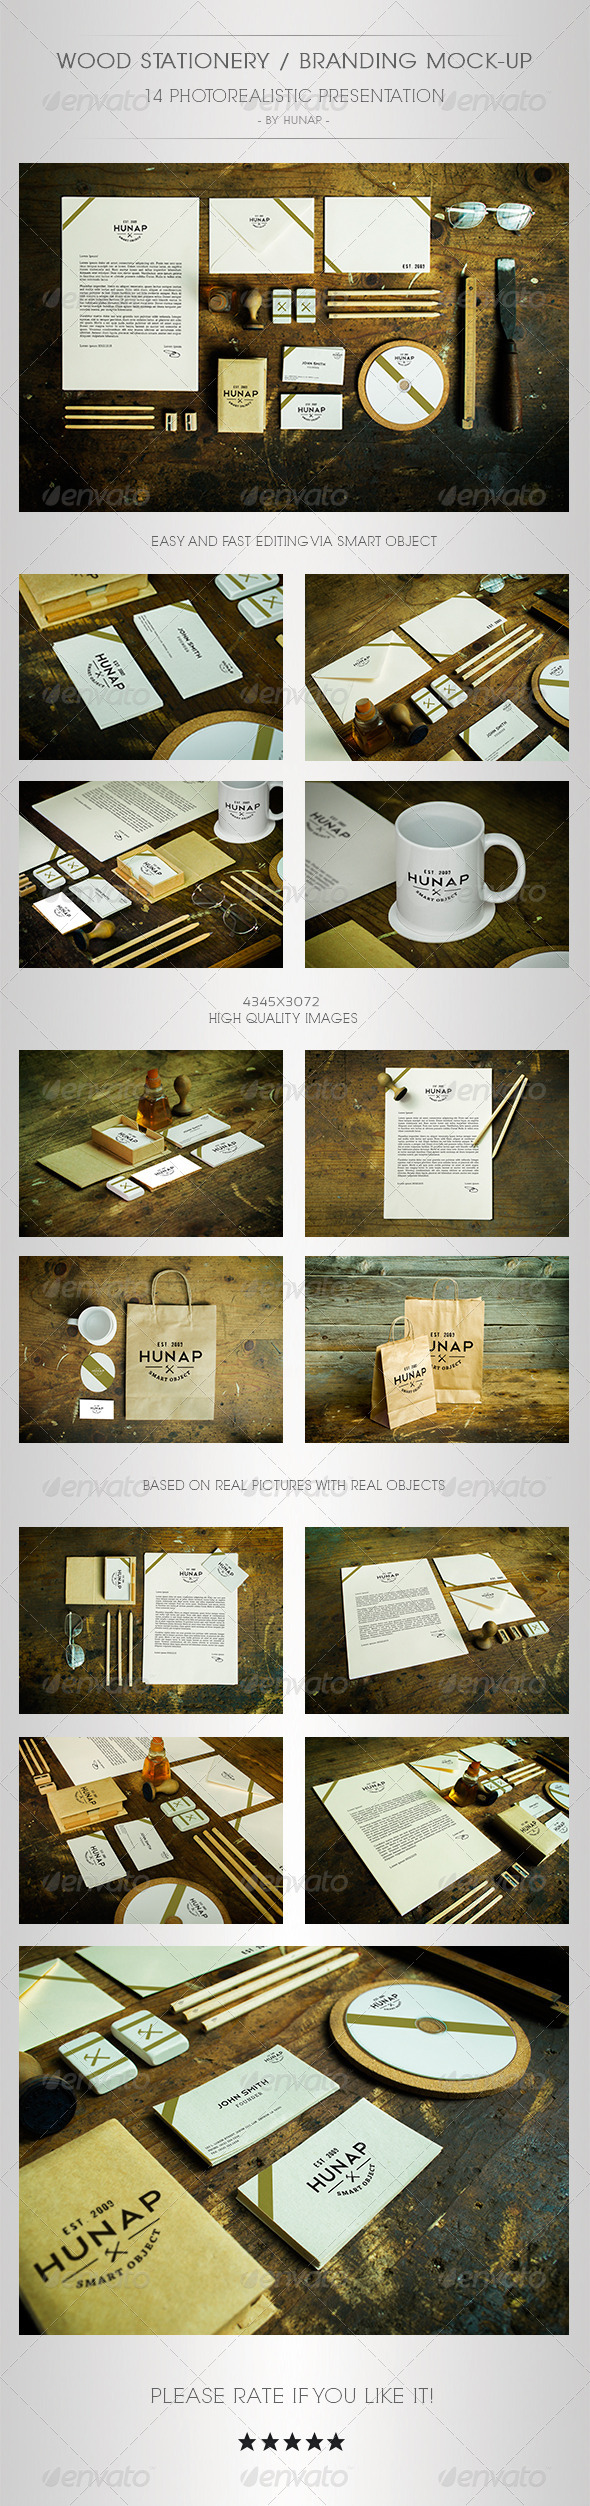 Download Wood Stationery / Branding Mock-Up by kapor | GraphicRiver